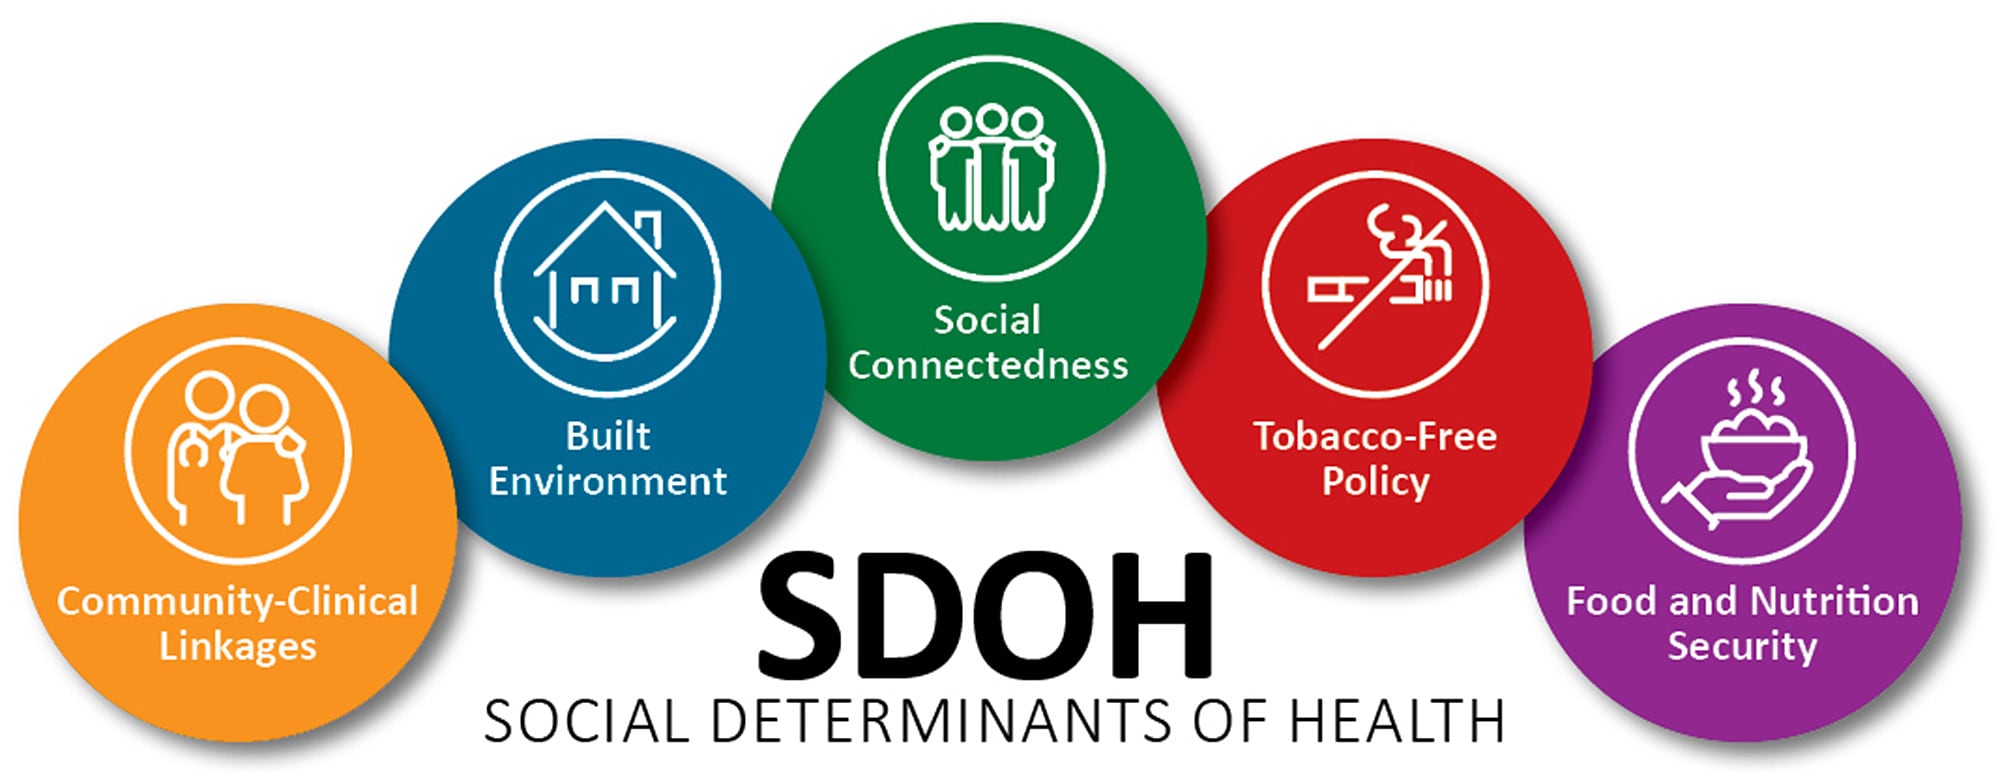 Graphic of five overlapping circles representing the five social determinants of health: community-clinical linkages, built environment, social connectedness, tobacco-free policy, and food and nutrition security.